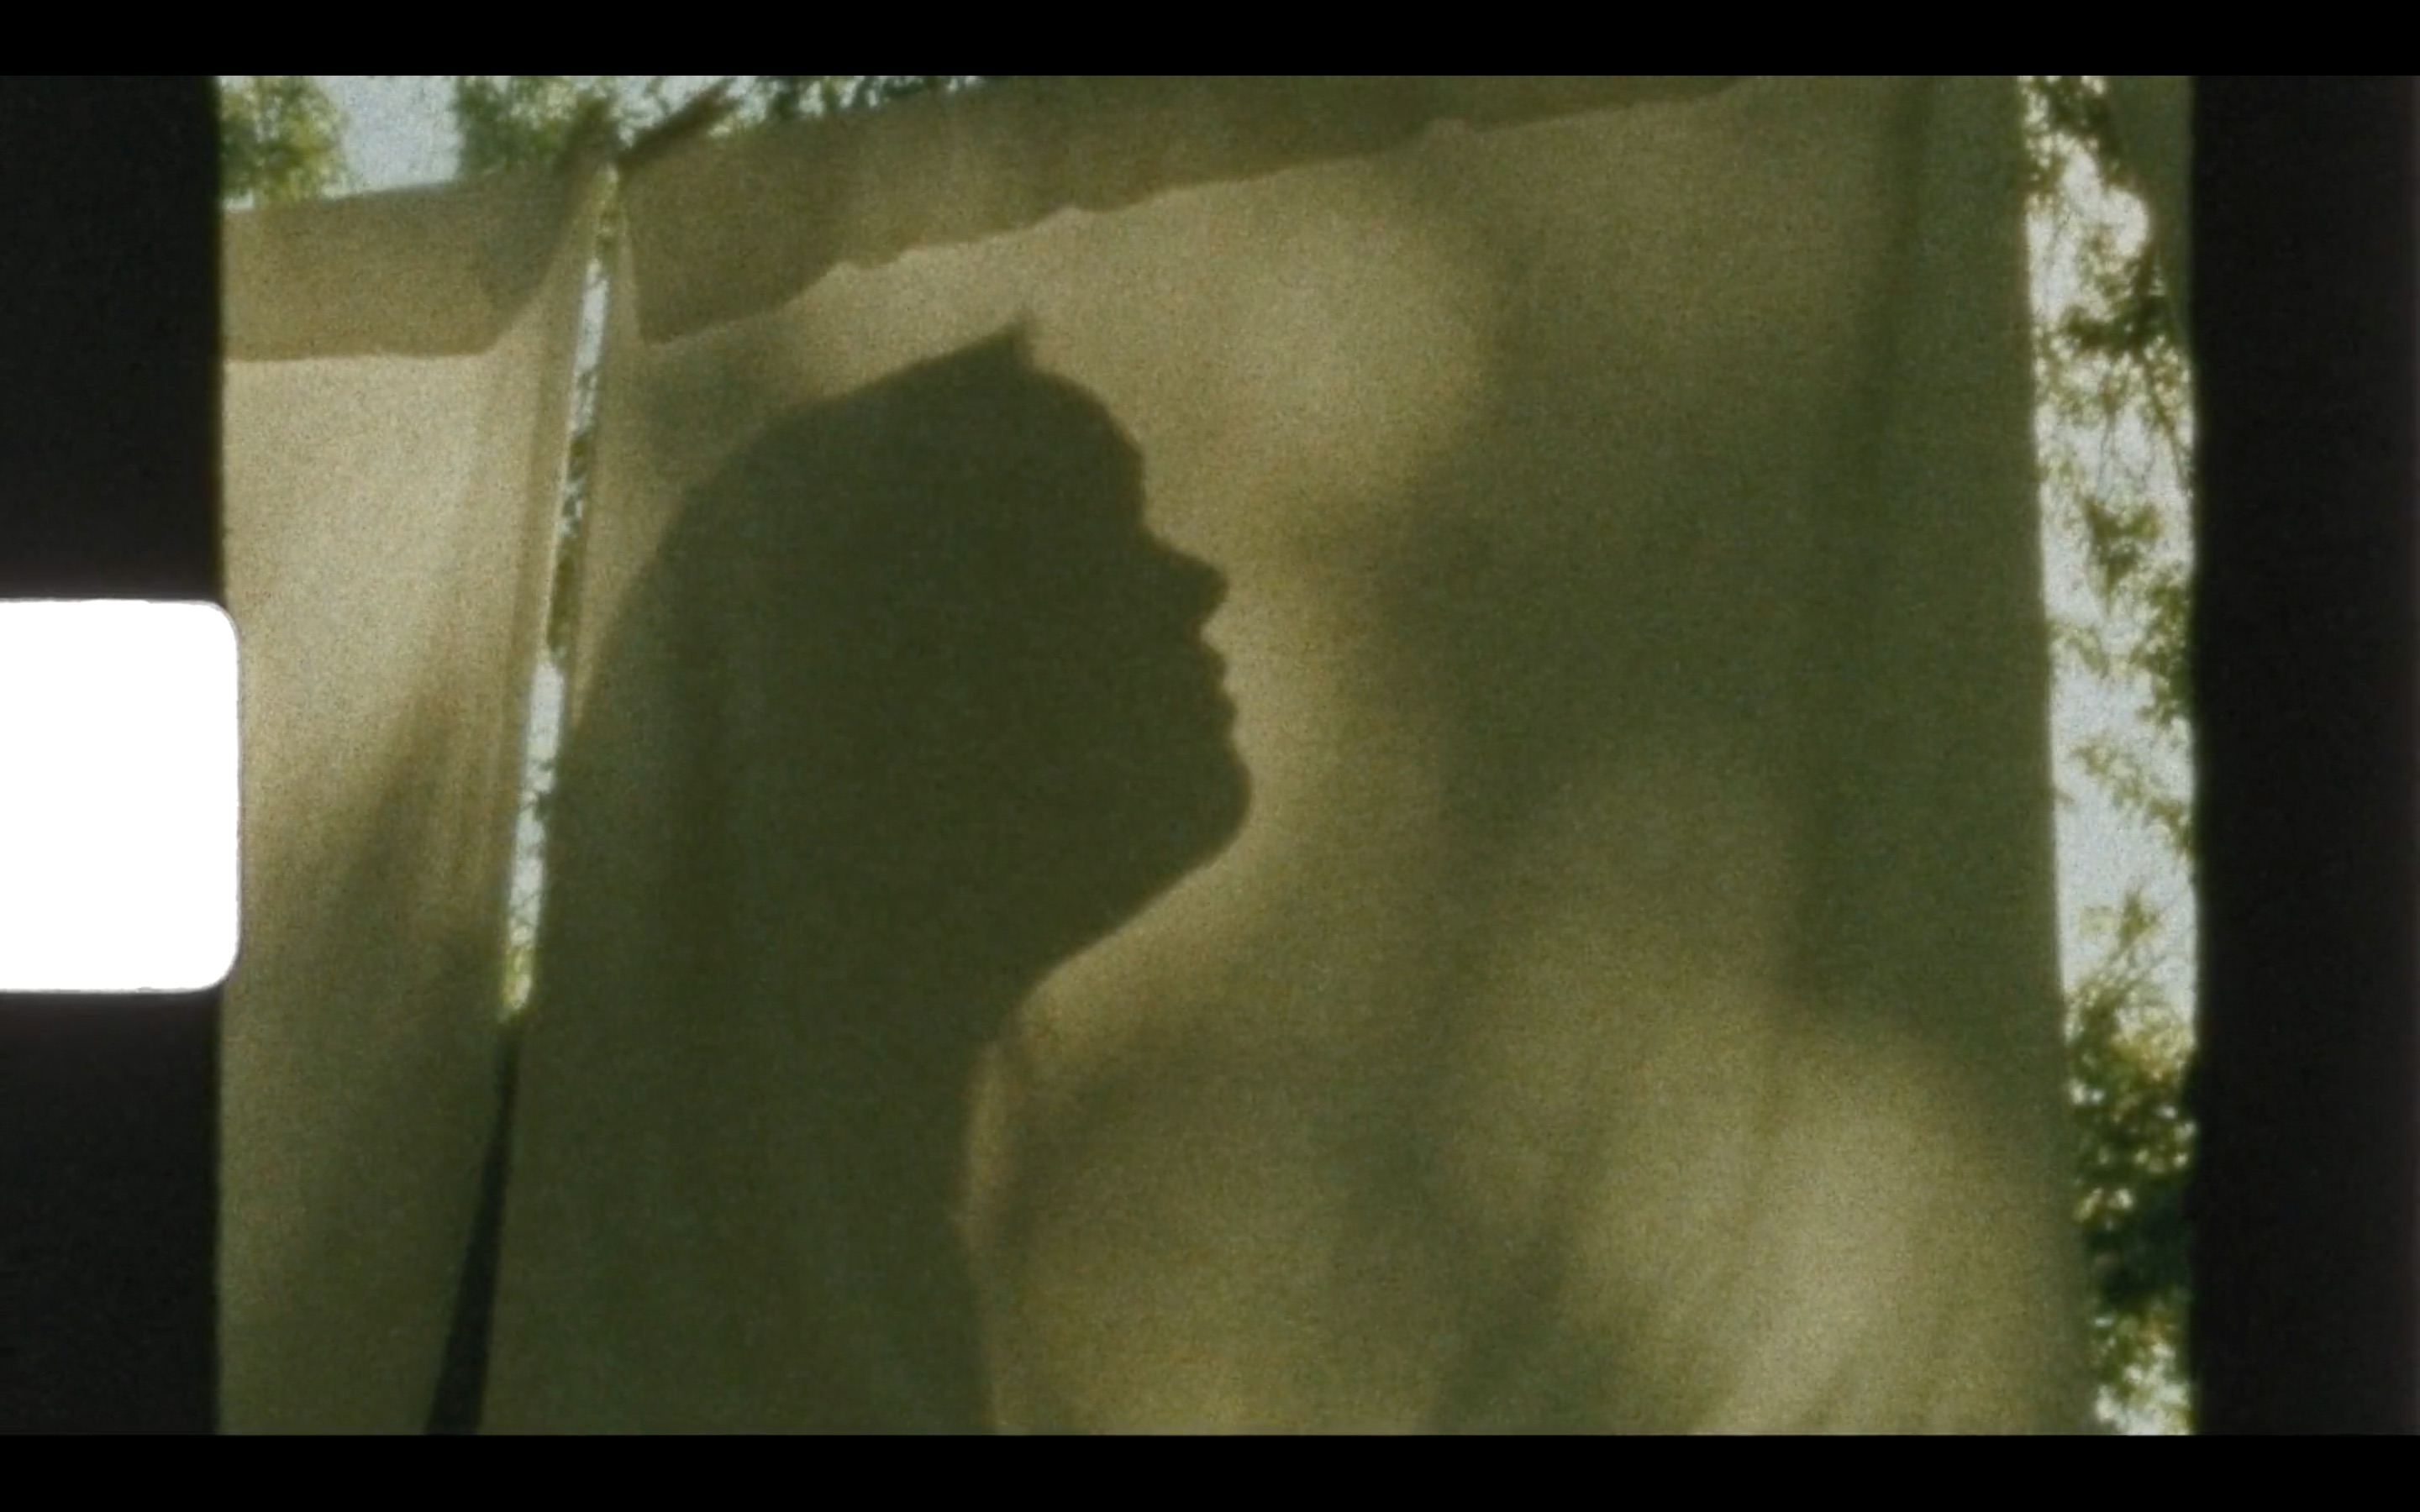 A still from the film "Laundry Day" by JJ Neepin. The still features an outdoor scene on film. The scene takes place under the leaves of a large tree. The scene is blocked by a single white blanket or sheet of fabric, which hangs alongside another on a drying line. The silhouette of a long haired figure dominates the sheet.